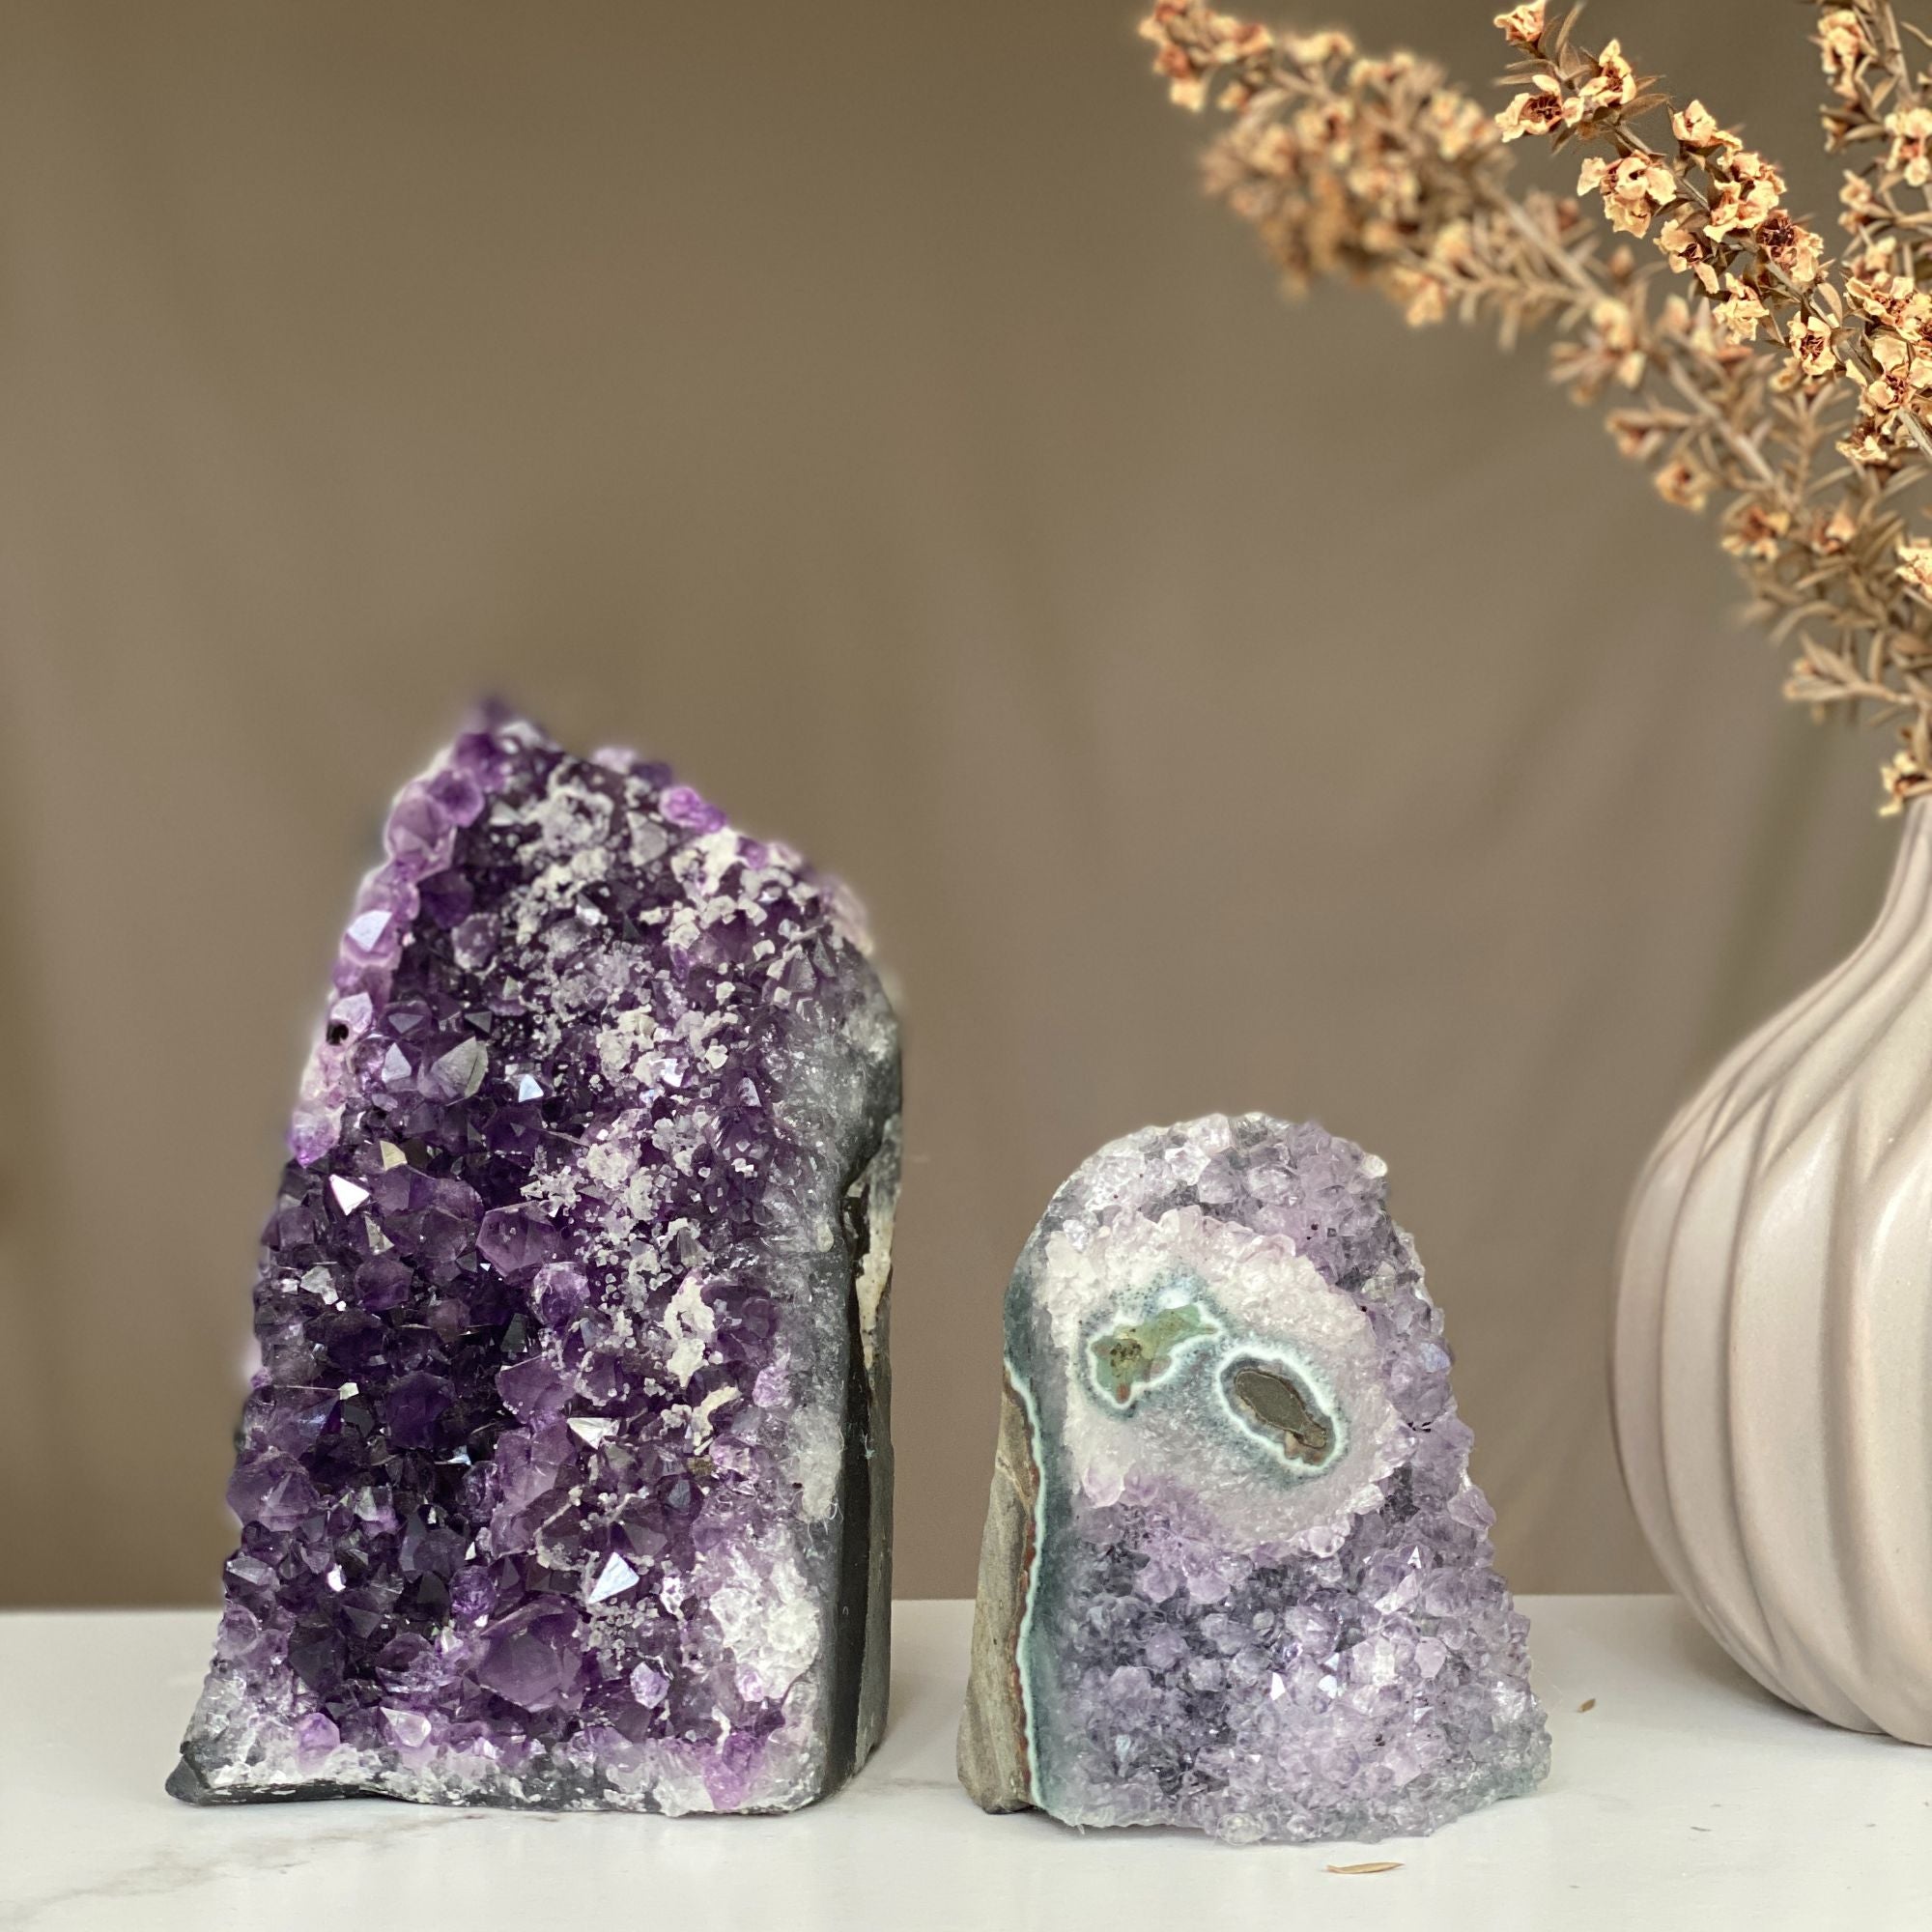 Stunning Amethyst Clusters with Agate Formation, 2 pieces 3 Lbs